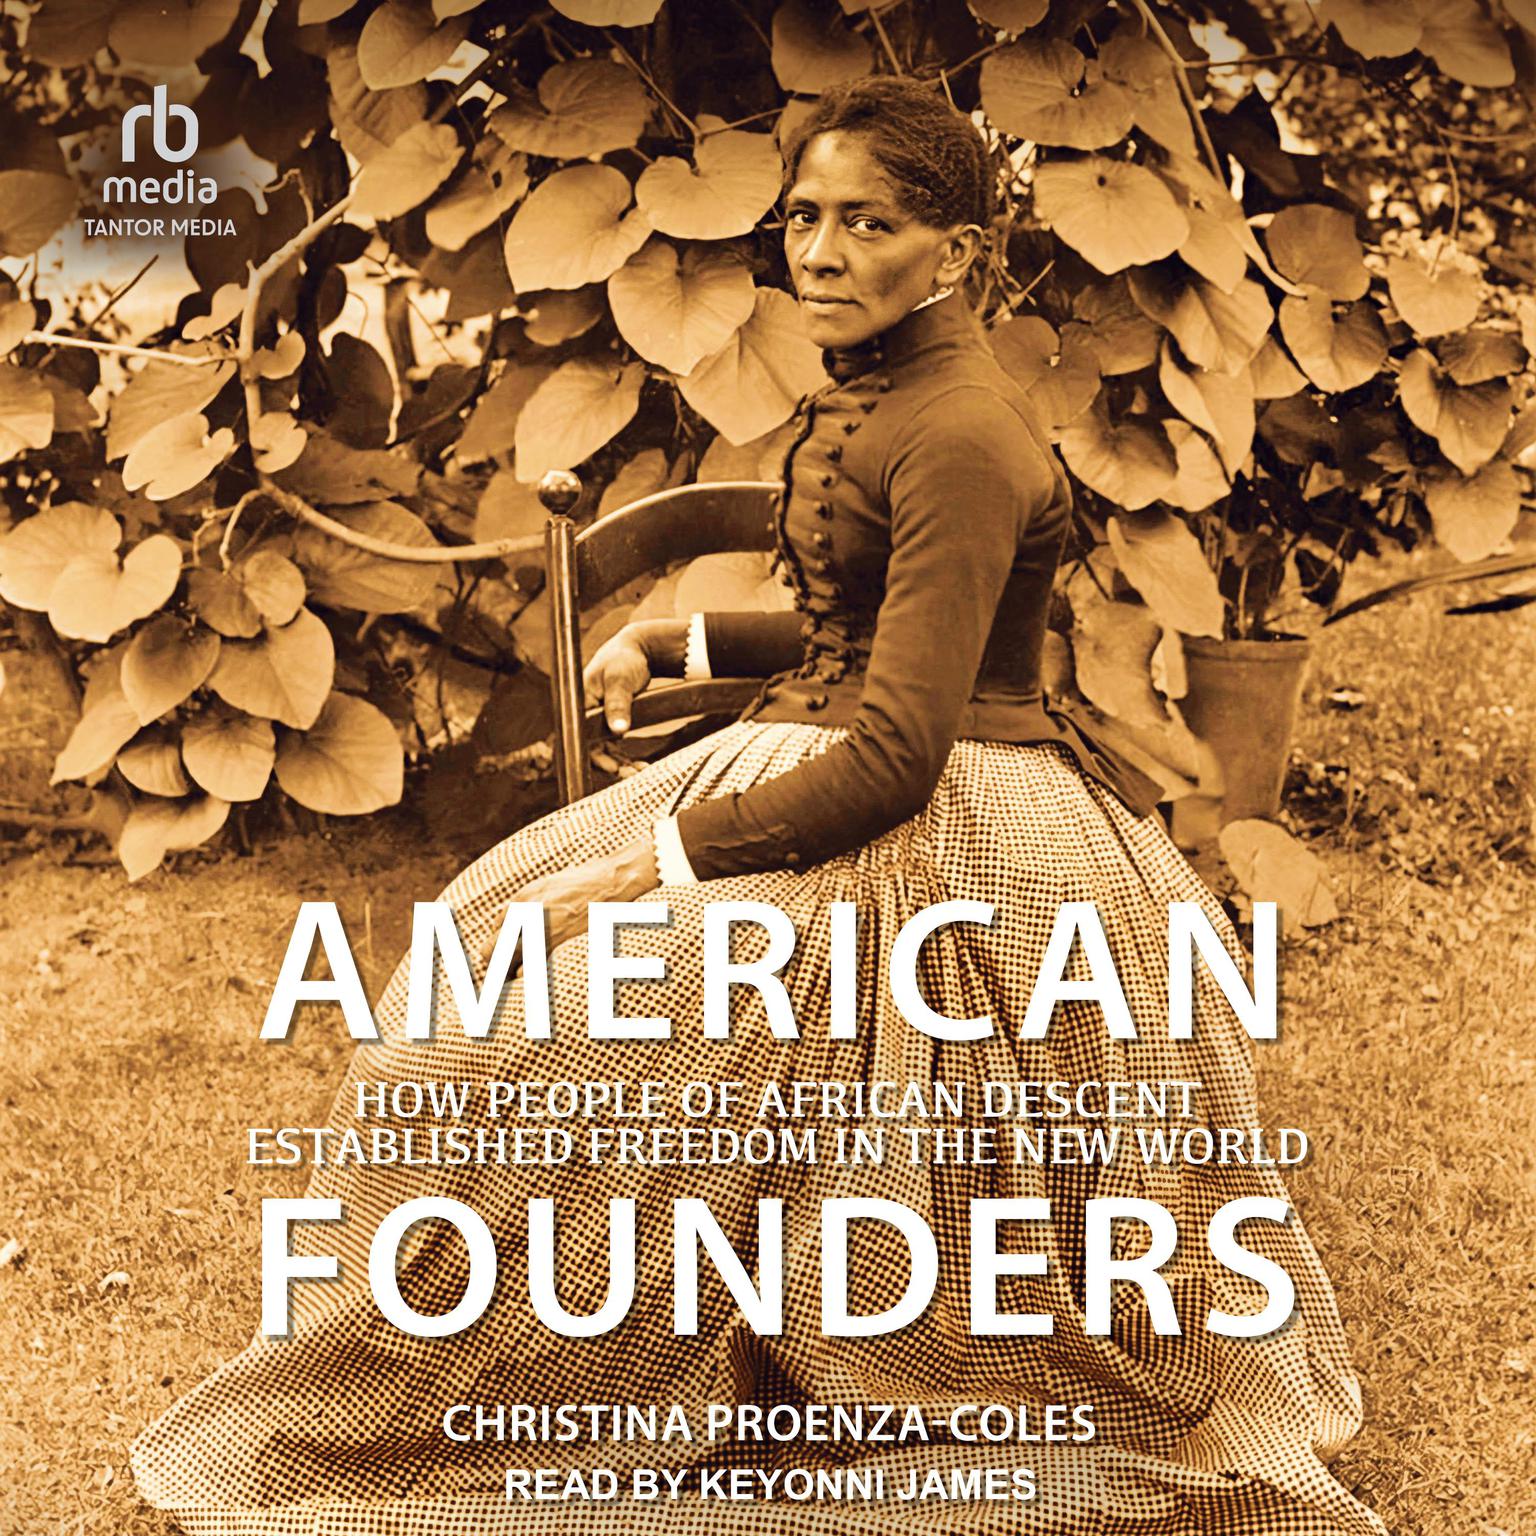 American Founders: How People of African Descent Established Freedom in the New World Audiobook, by Christina Proenza-Coles